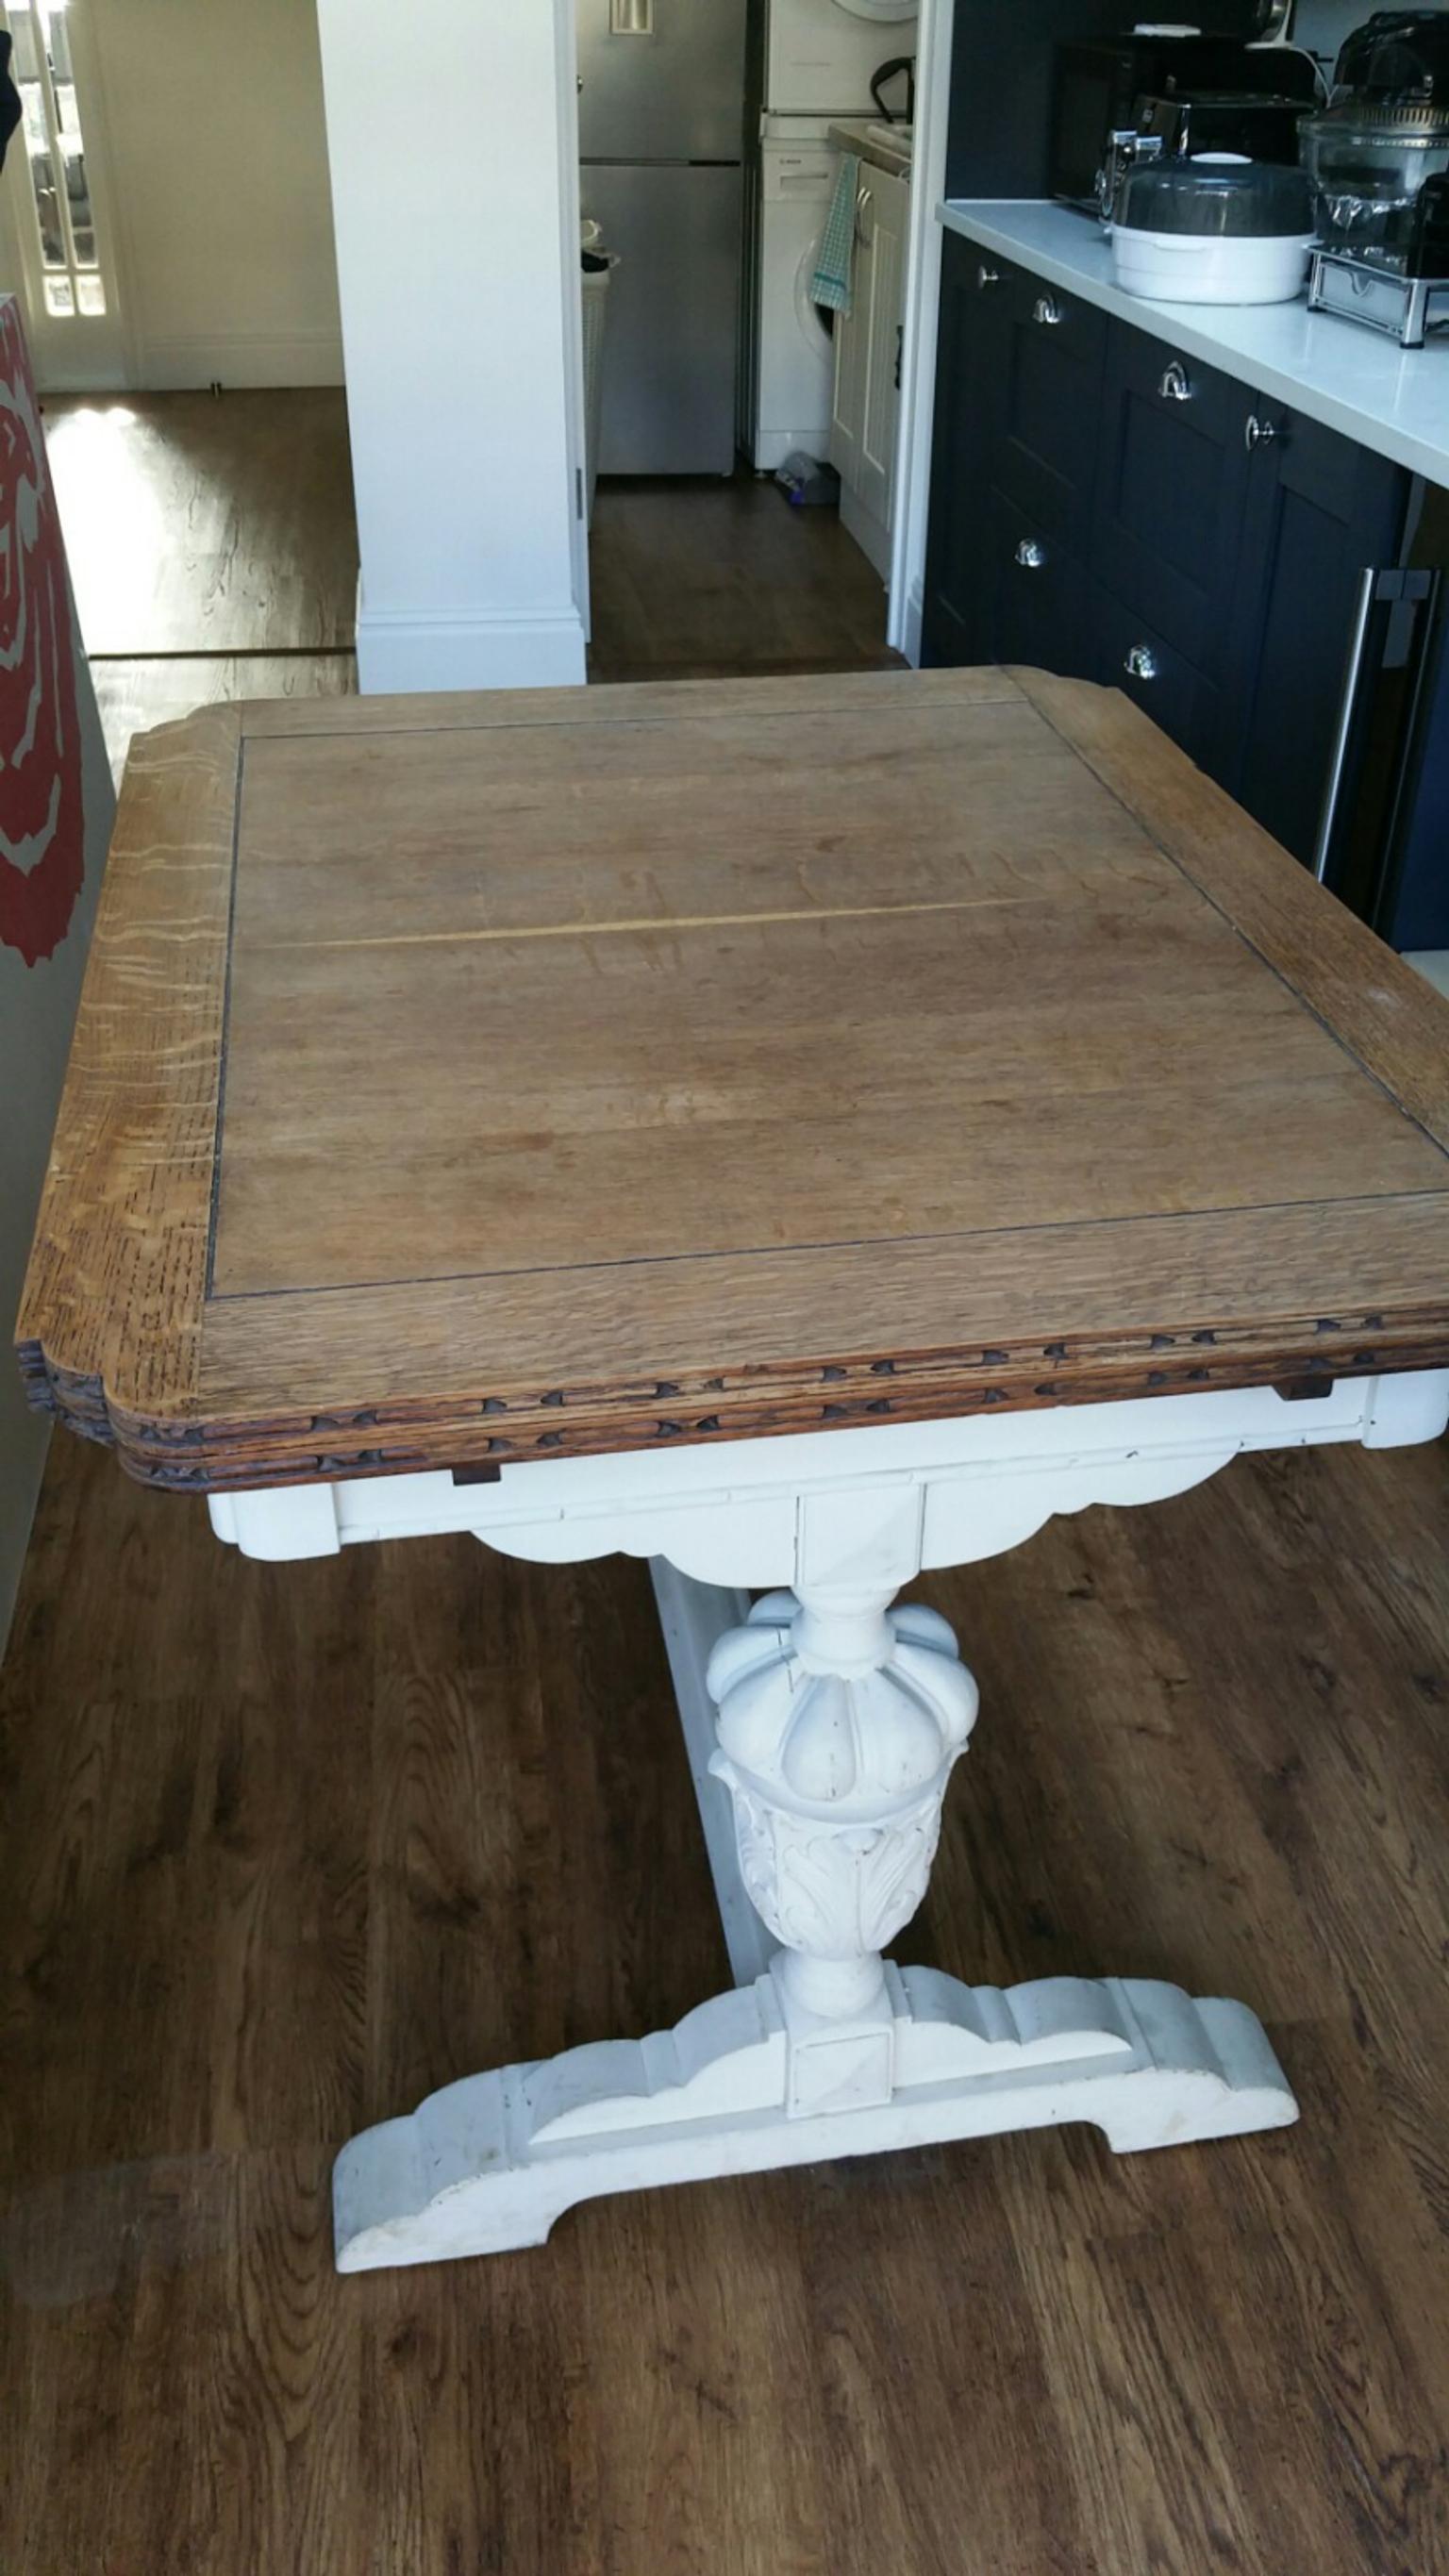 1930 S Antique Solid Oak Dining Table In Se18 Royal Borough Of Greenwich Fur 200 00 Zum Verkauf Shpock At